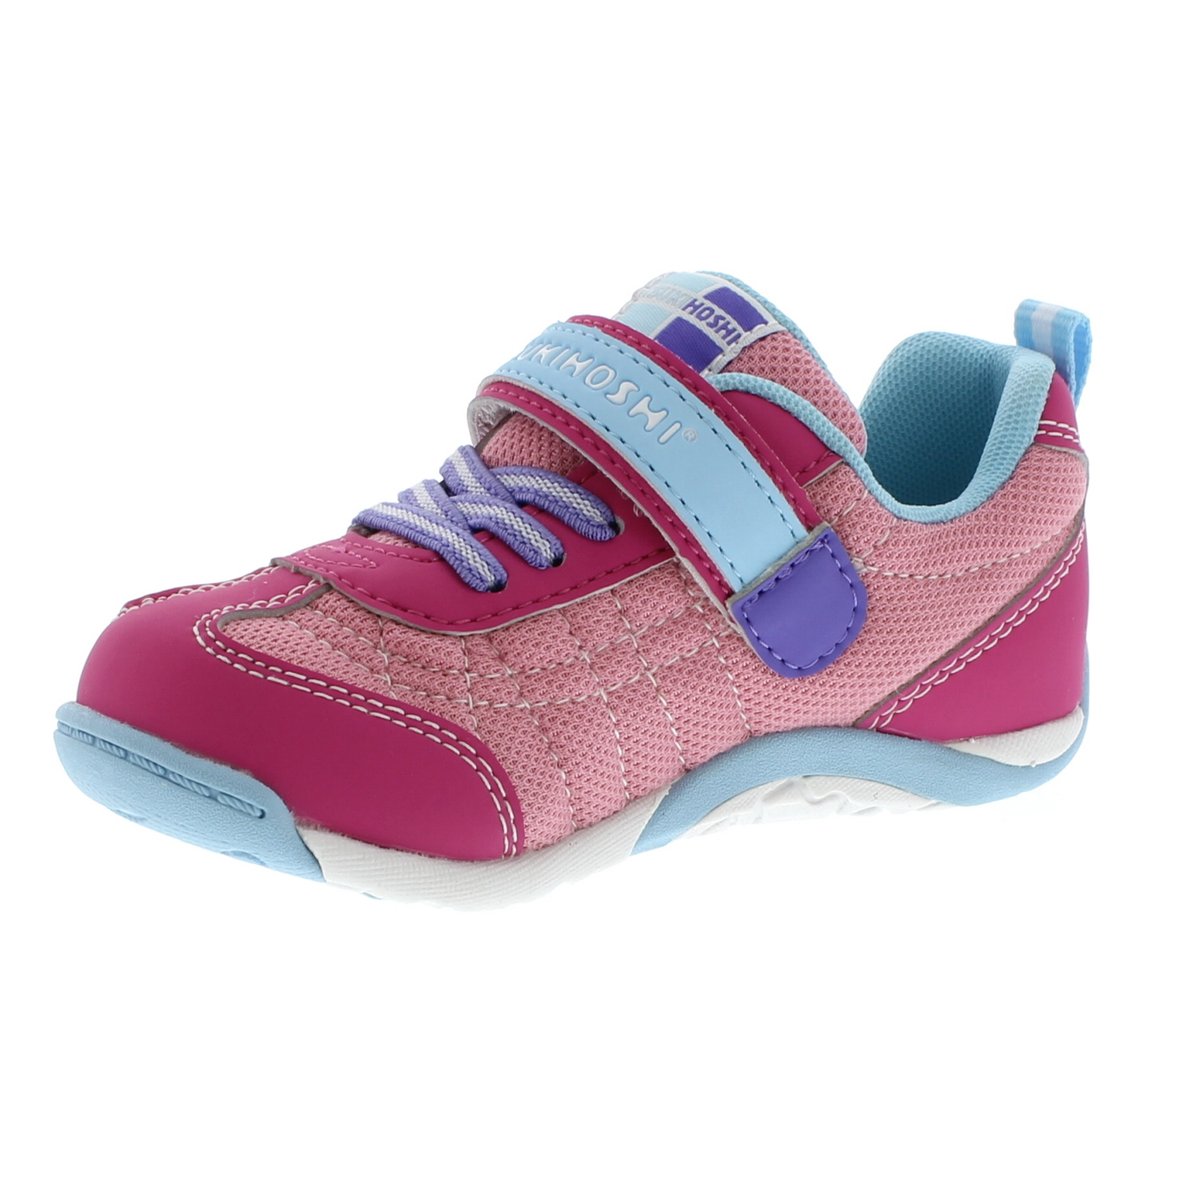 Childrens Tsukihoshi Kaz Sneaker in Fuchsia/Light Blue from the front view